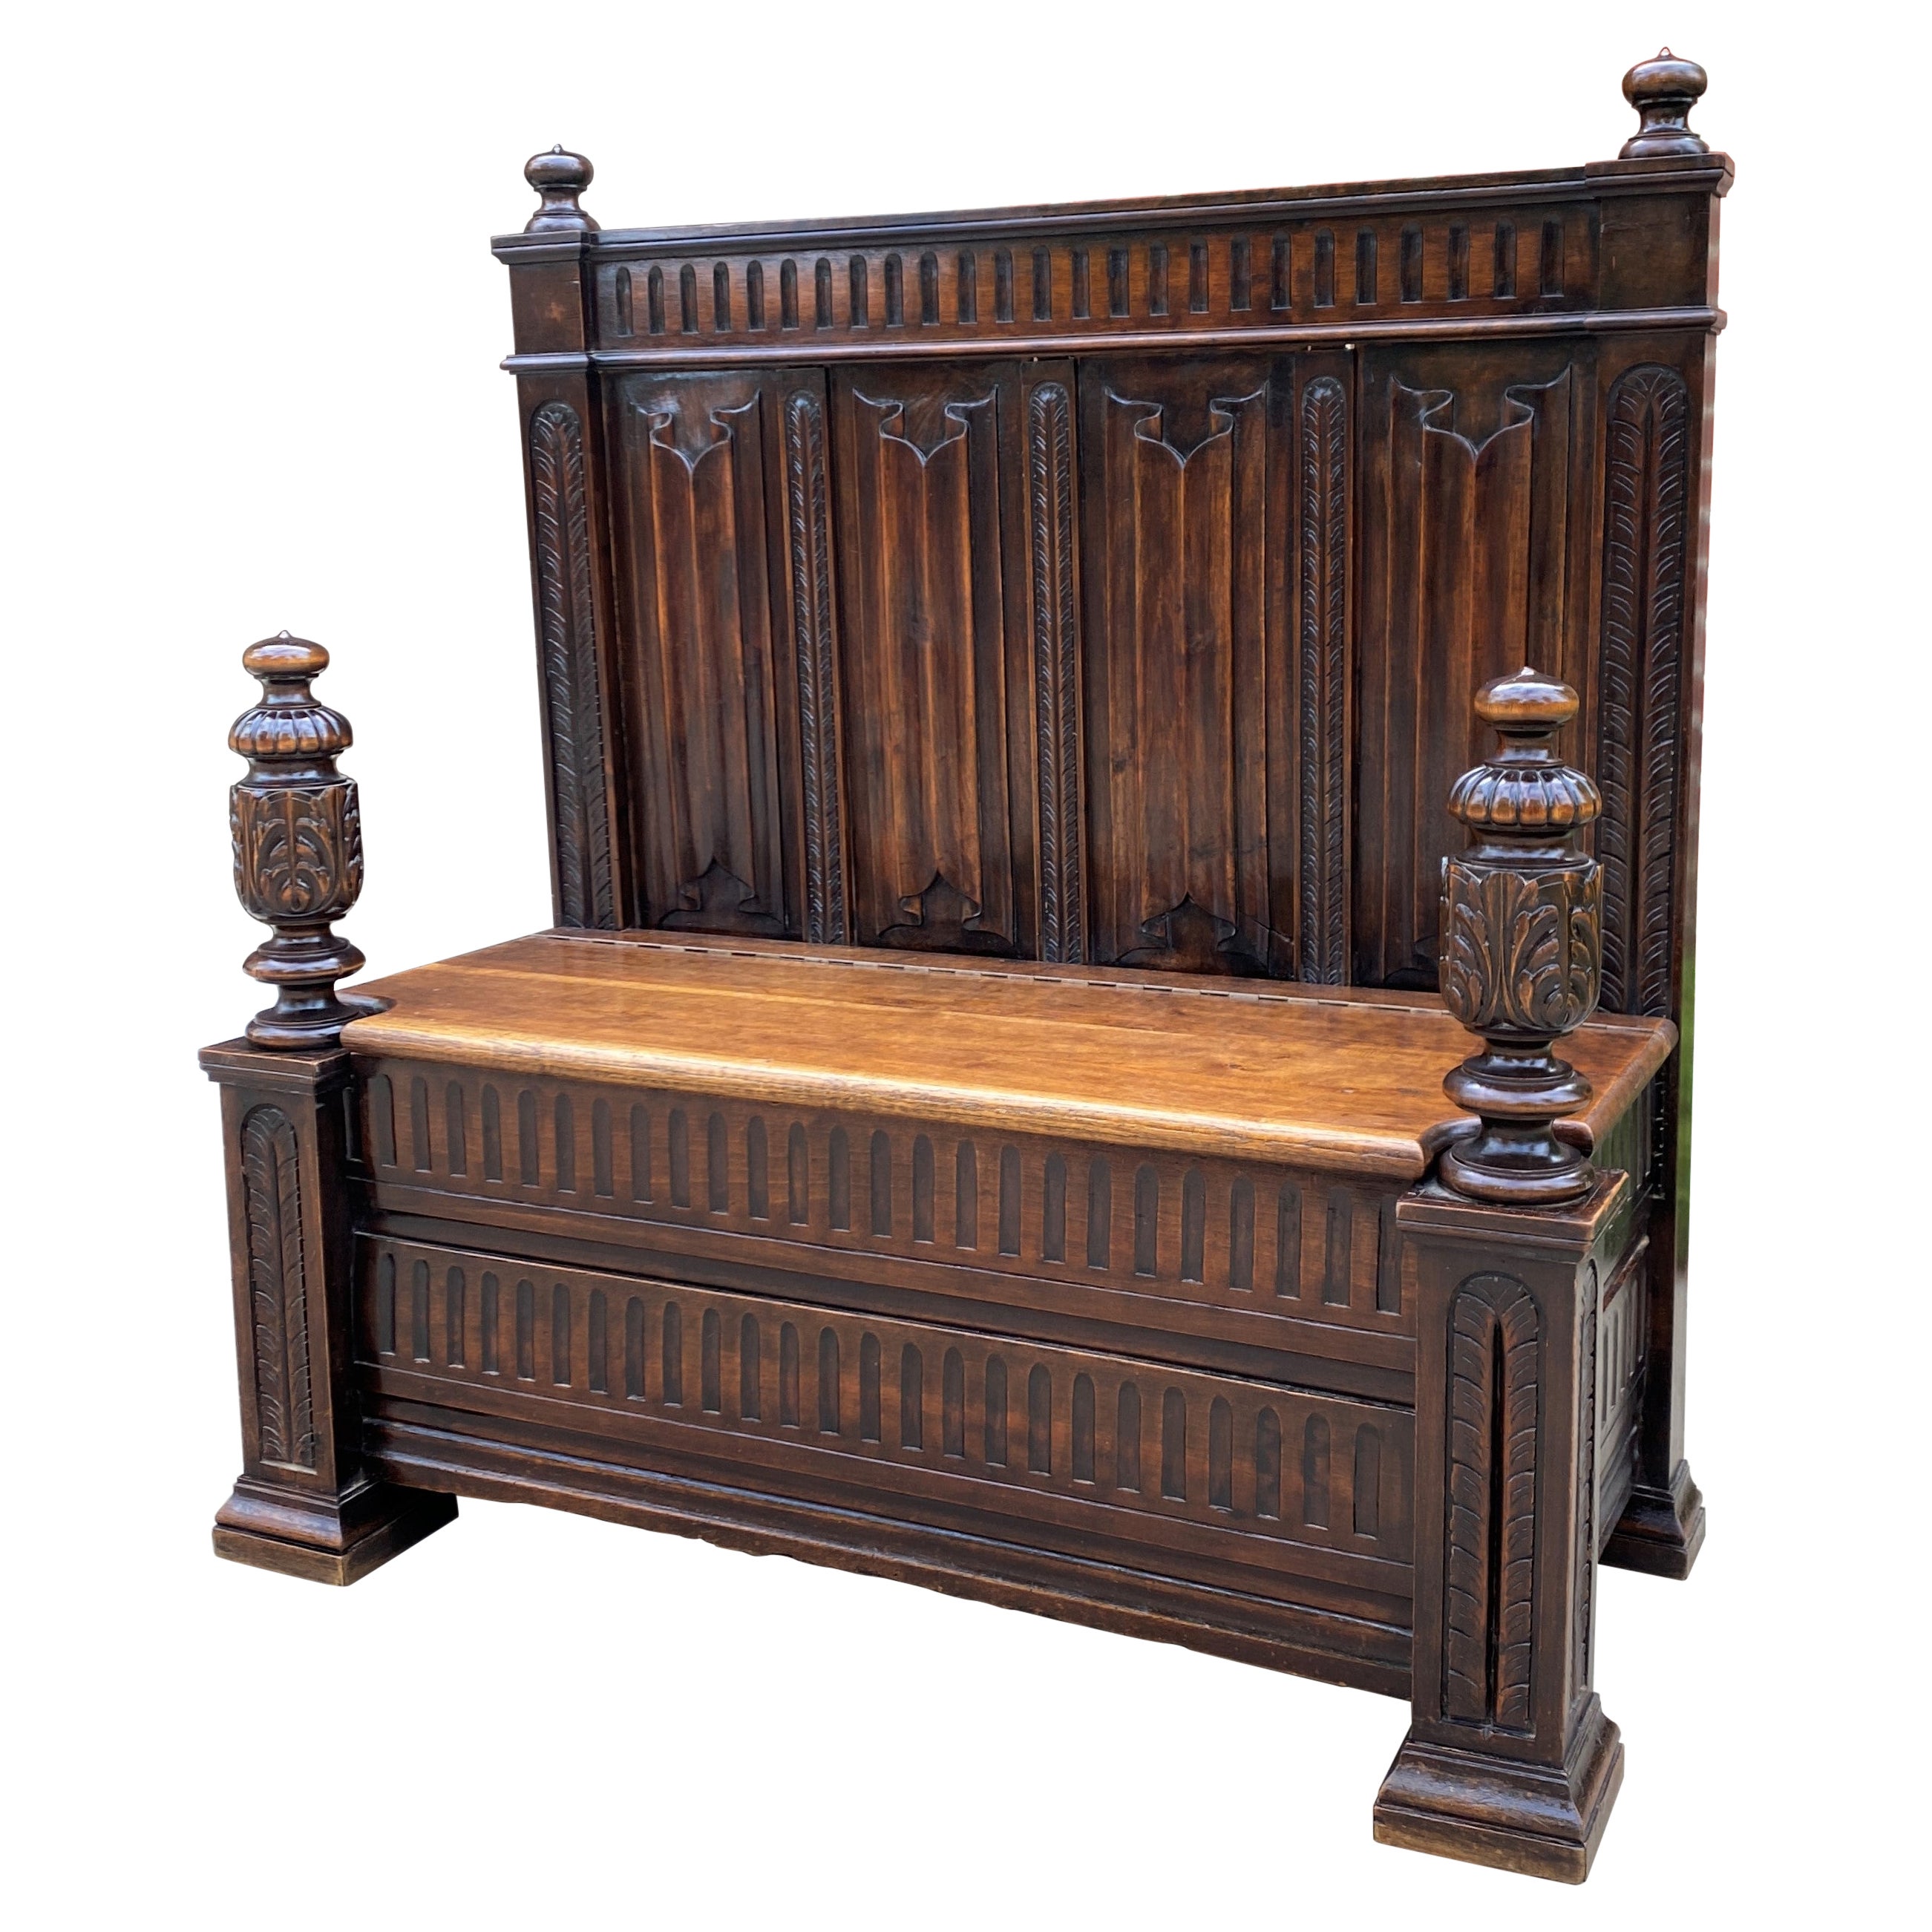 Antique French Bench Settee Gothic Revival Oak Lift Top Seat Storage Trunk 19C For Sale